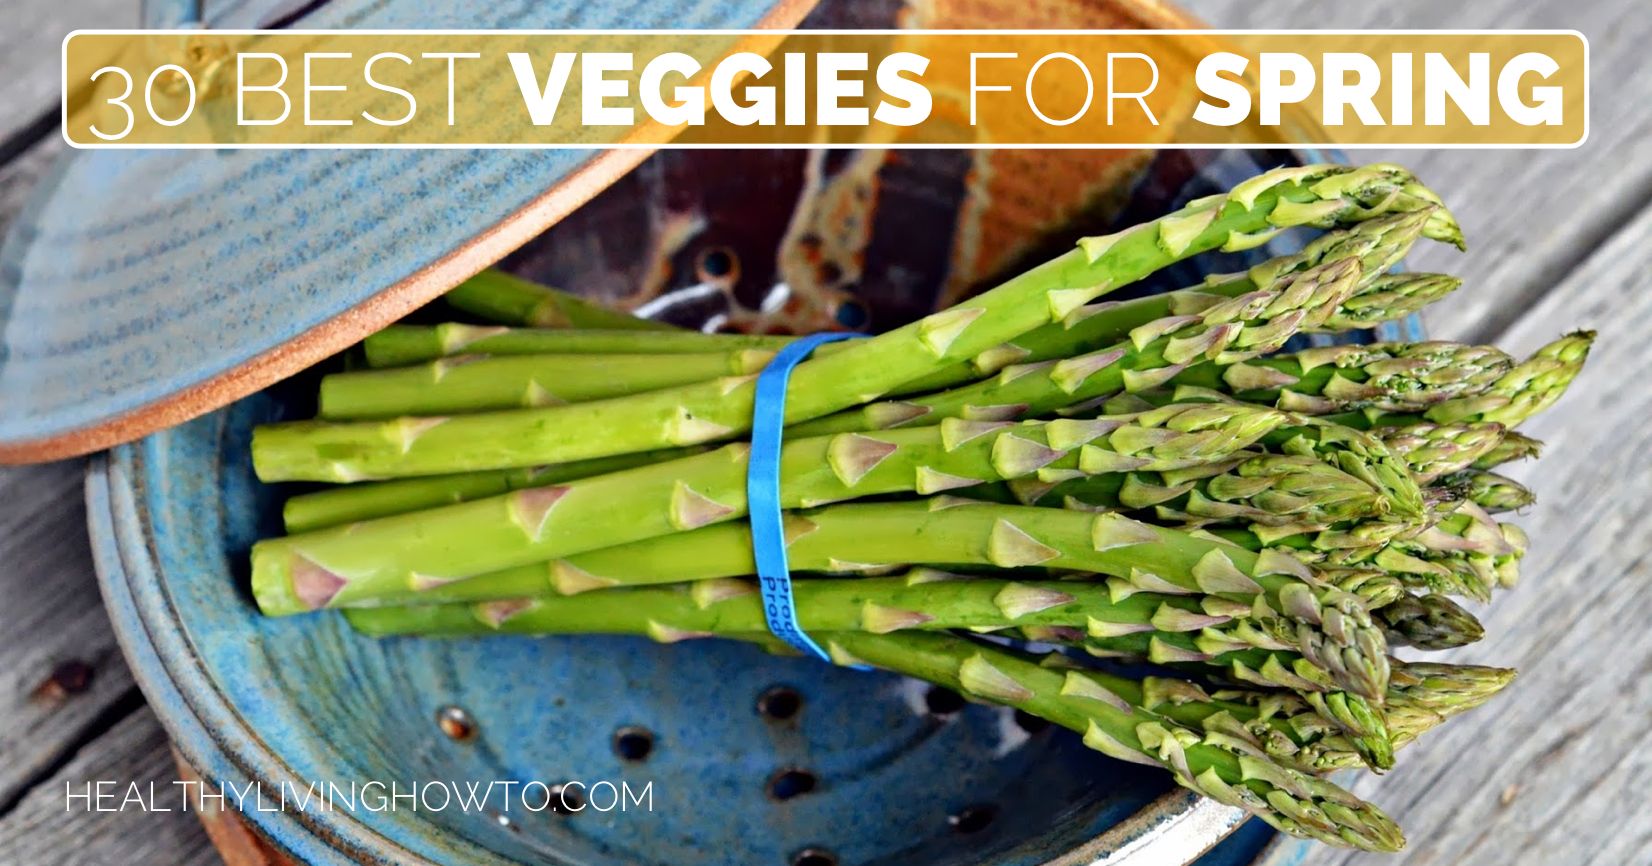 The 30 Best Veggies for Spring | healthylivinghowto.com